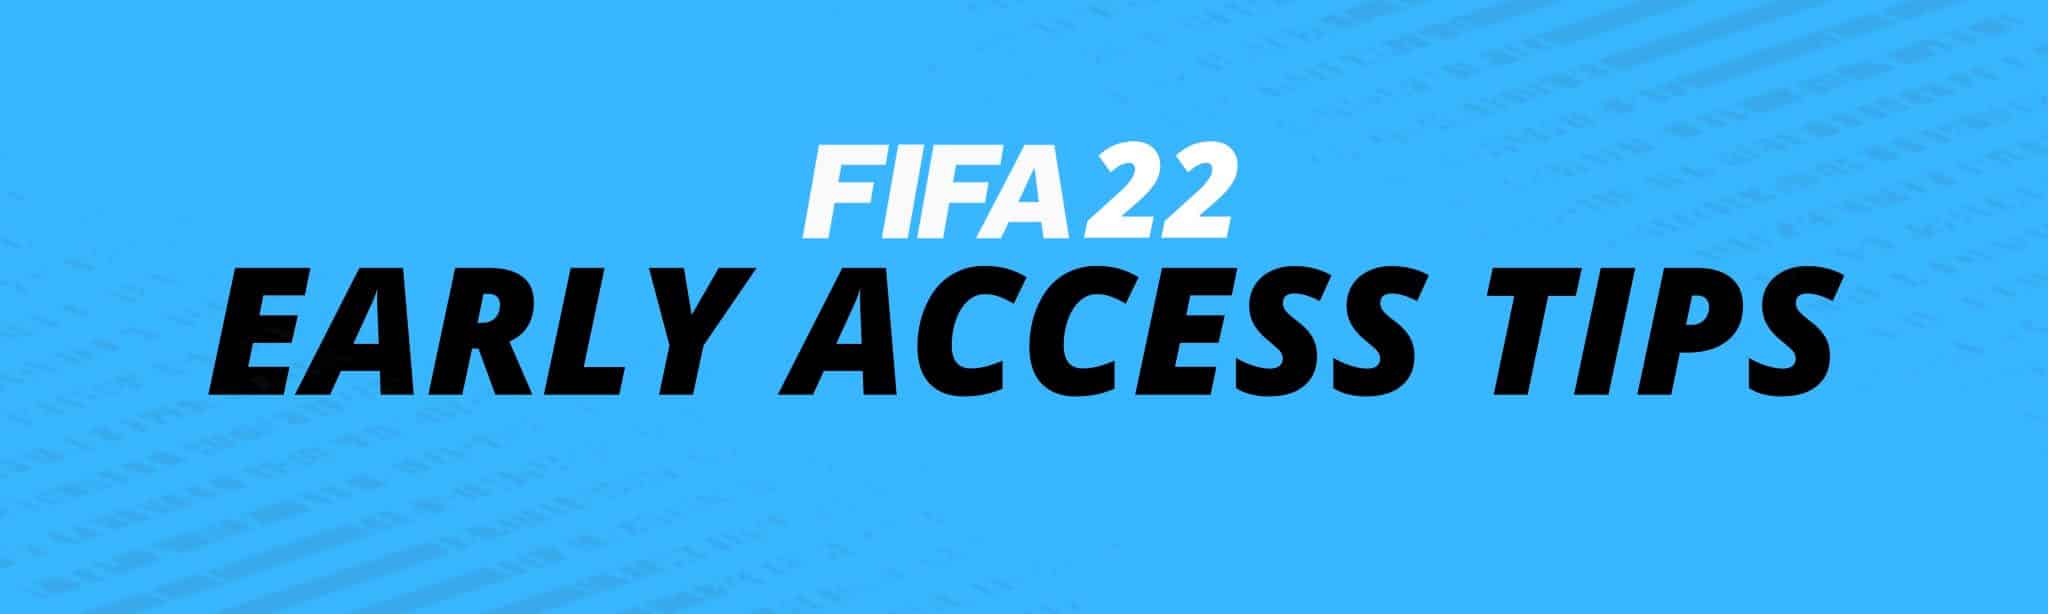 OFFICIAL* FIFA 22 WEB APP GUIDE!!! HOW TO START THE FIFA 22 WEB APP!!! FIFA  22 WEB APP TRADING!!! 